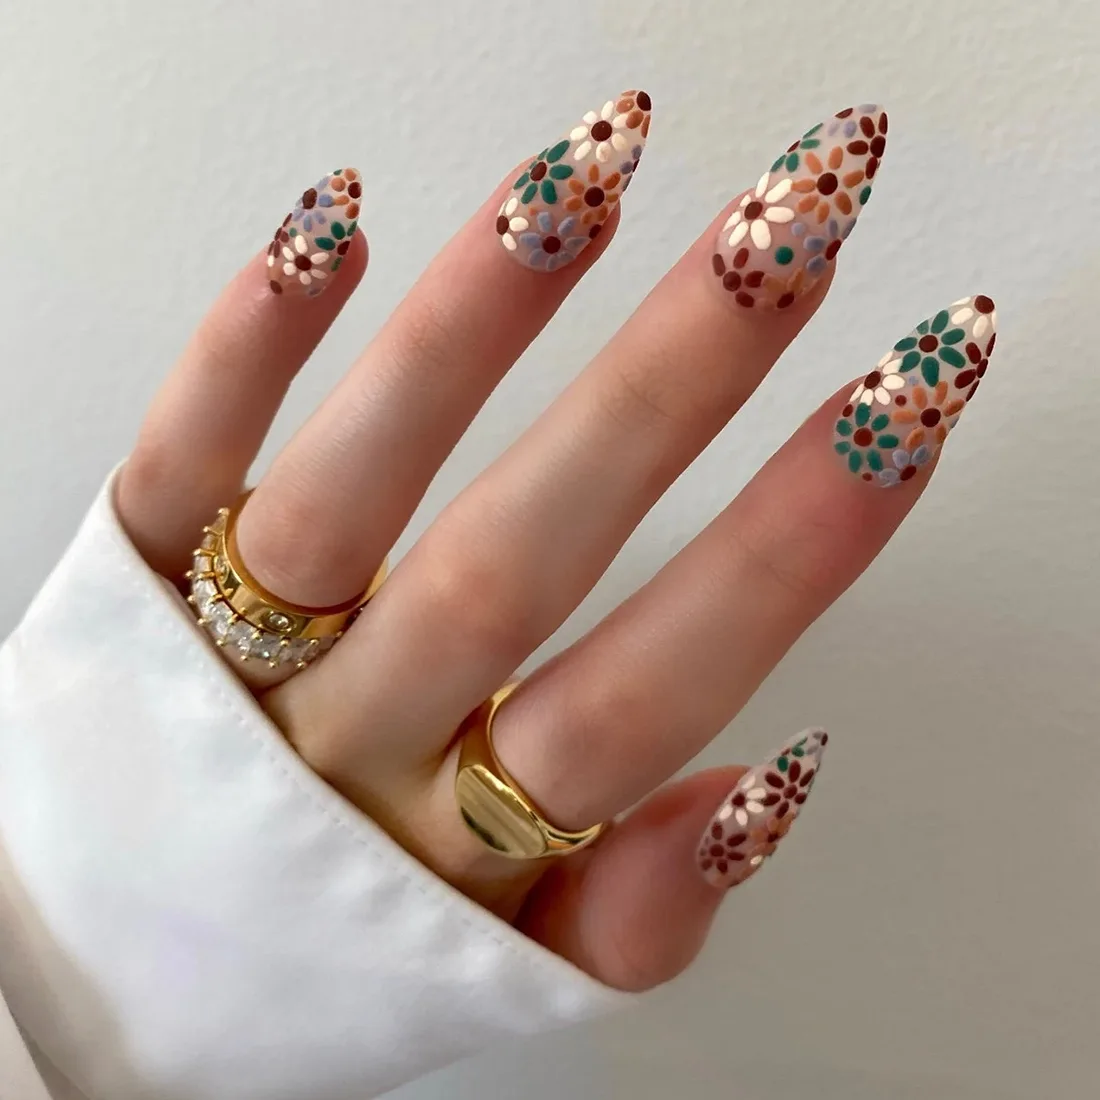 Sheer nails with fall flowers painted in blue, green, orange, burgundy and white  | Trendy Fall Nail Designs You Can Buy as Press-Ons on Etsy | Slashed Beauty